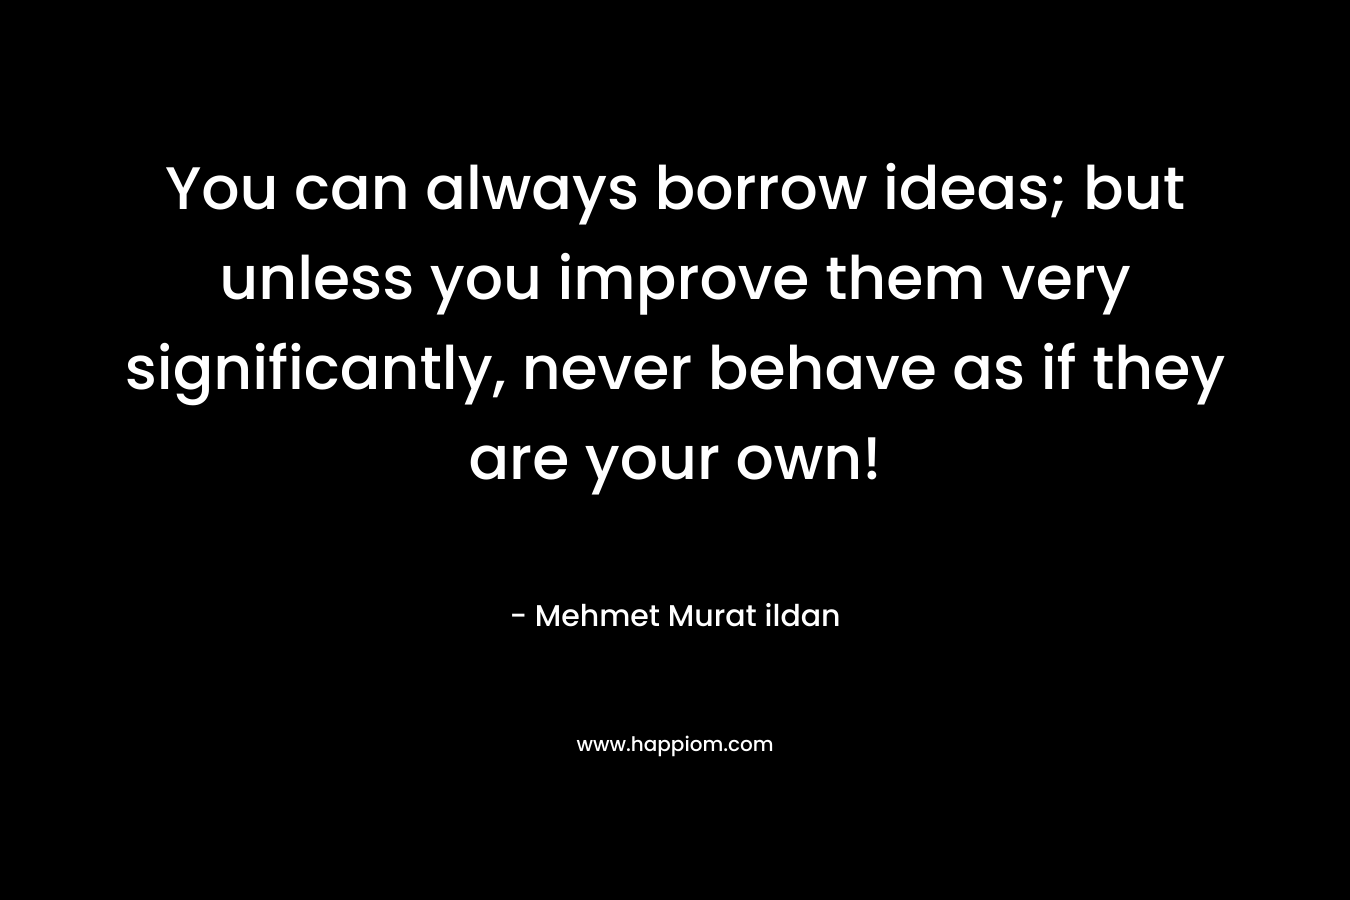 You can always borrow ideas; but unless you improve them very significantly, never behave as if they are your own! – Mehmet Murat ildan